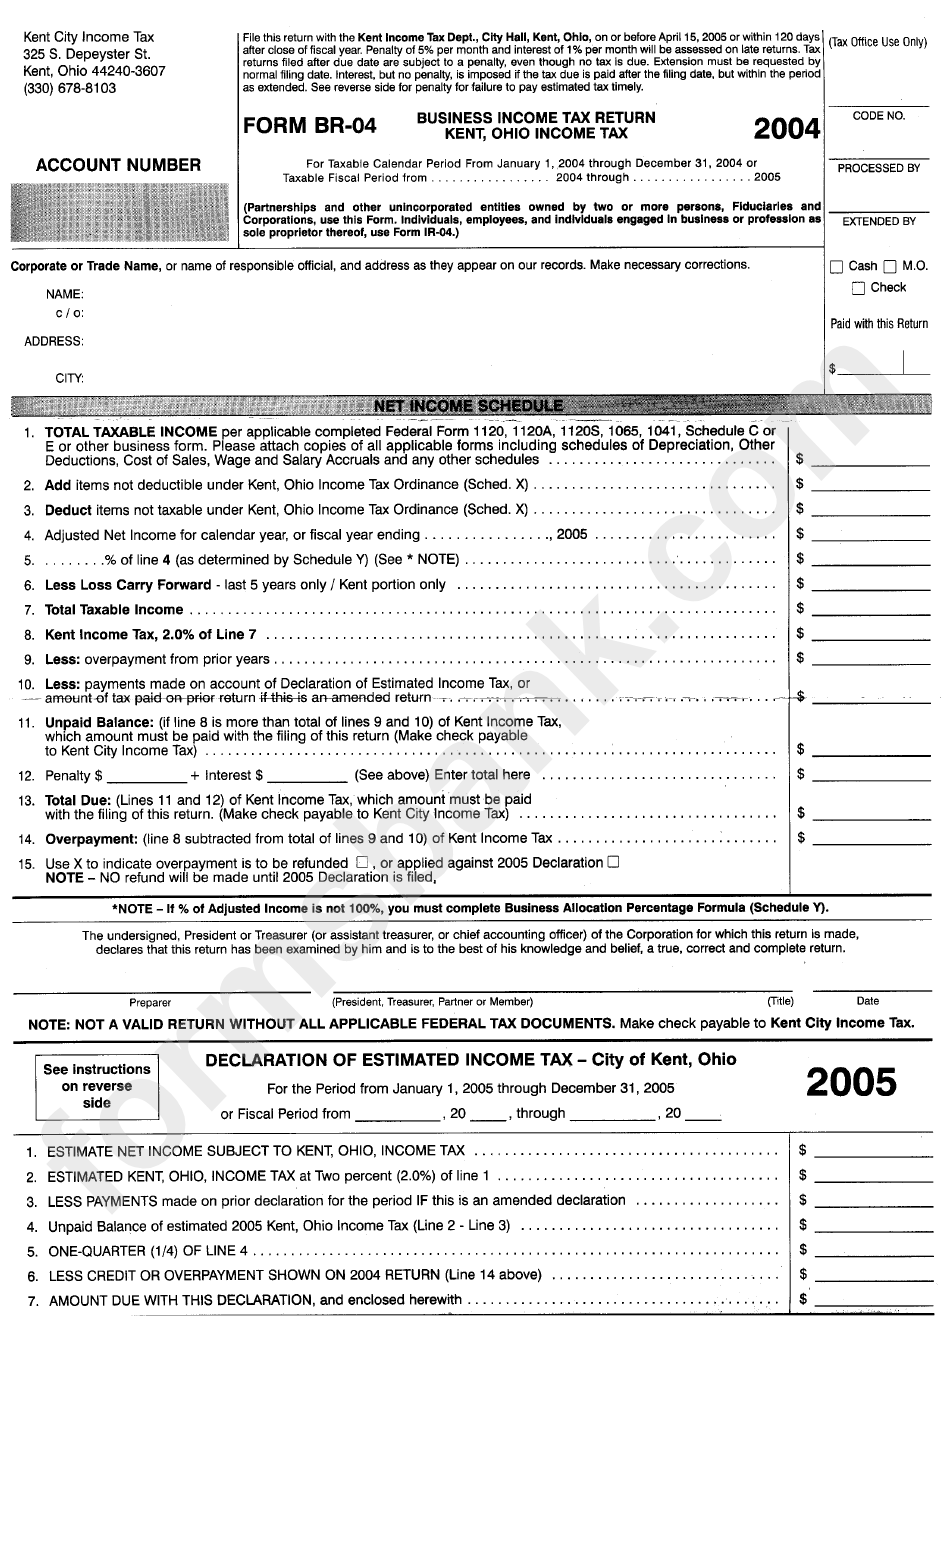 Form Br-04 - Business Income Tax Return - 2004